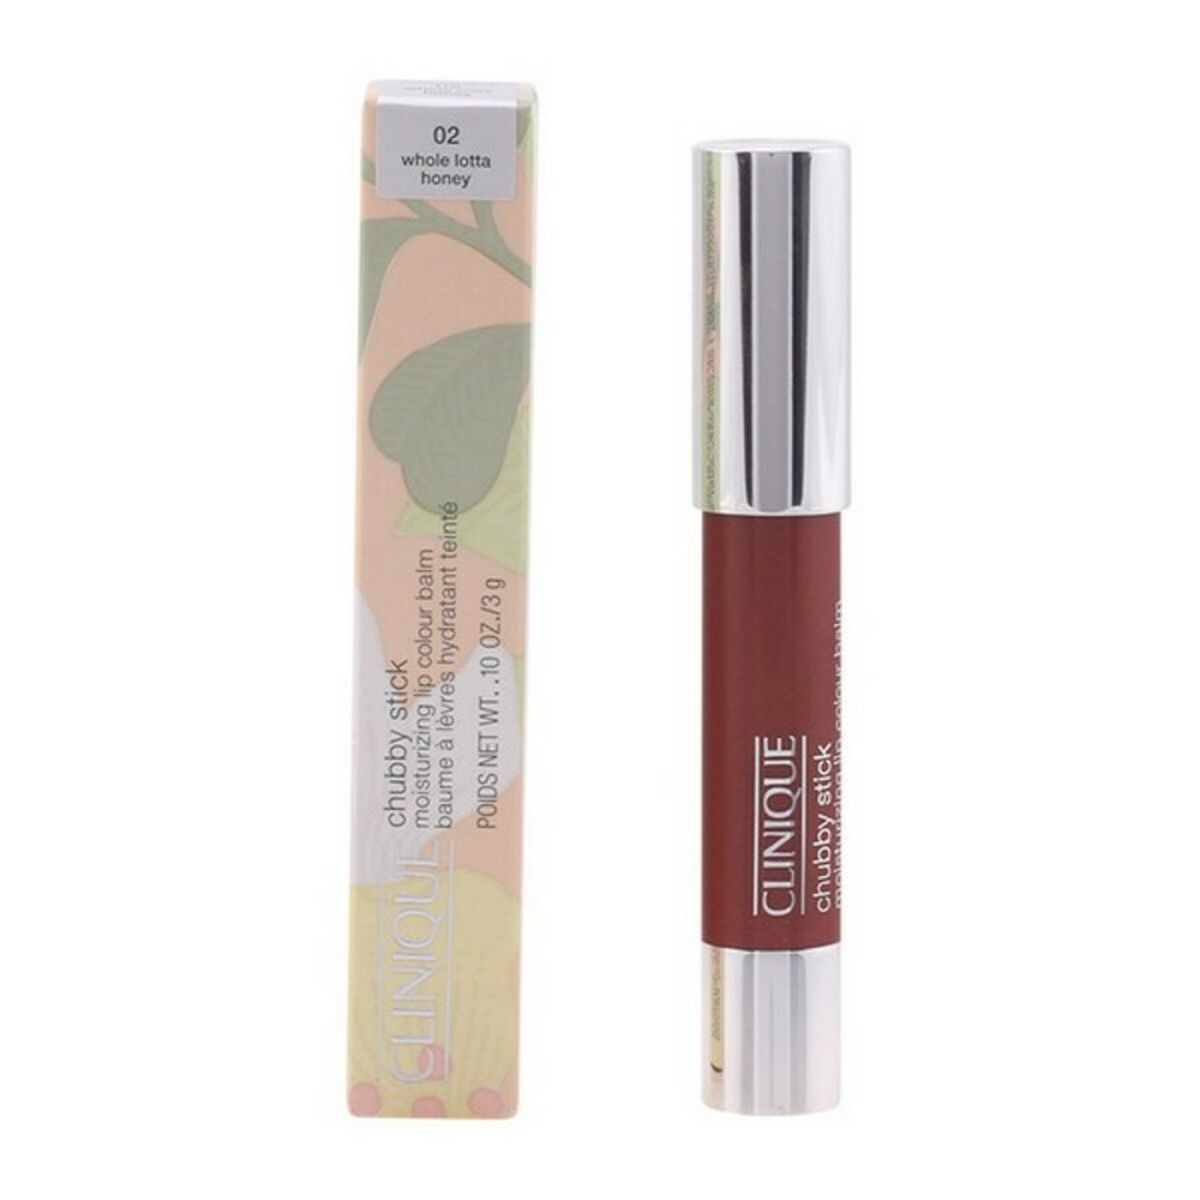 Farget Leppebalsam Chubby Stick Clinique